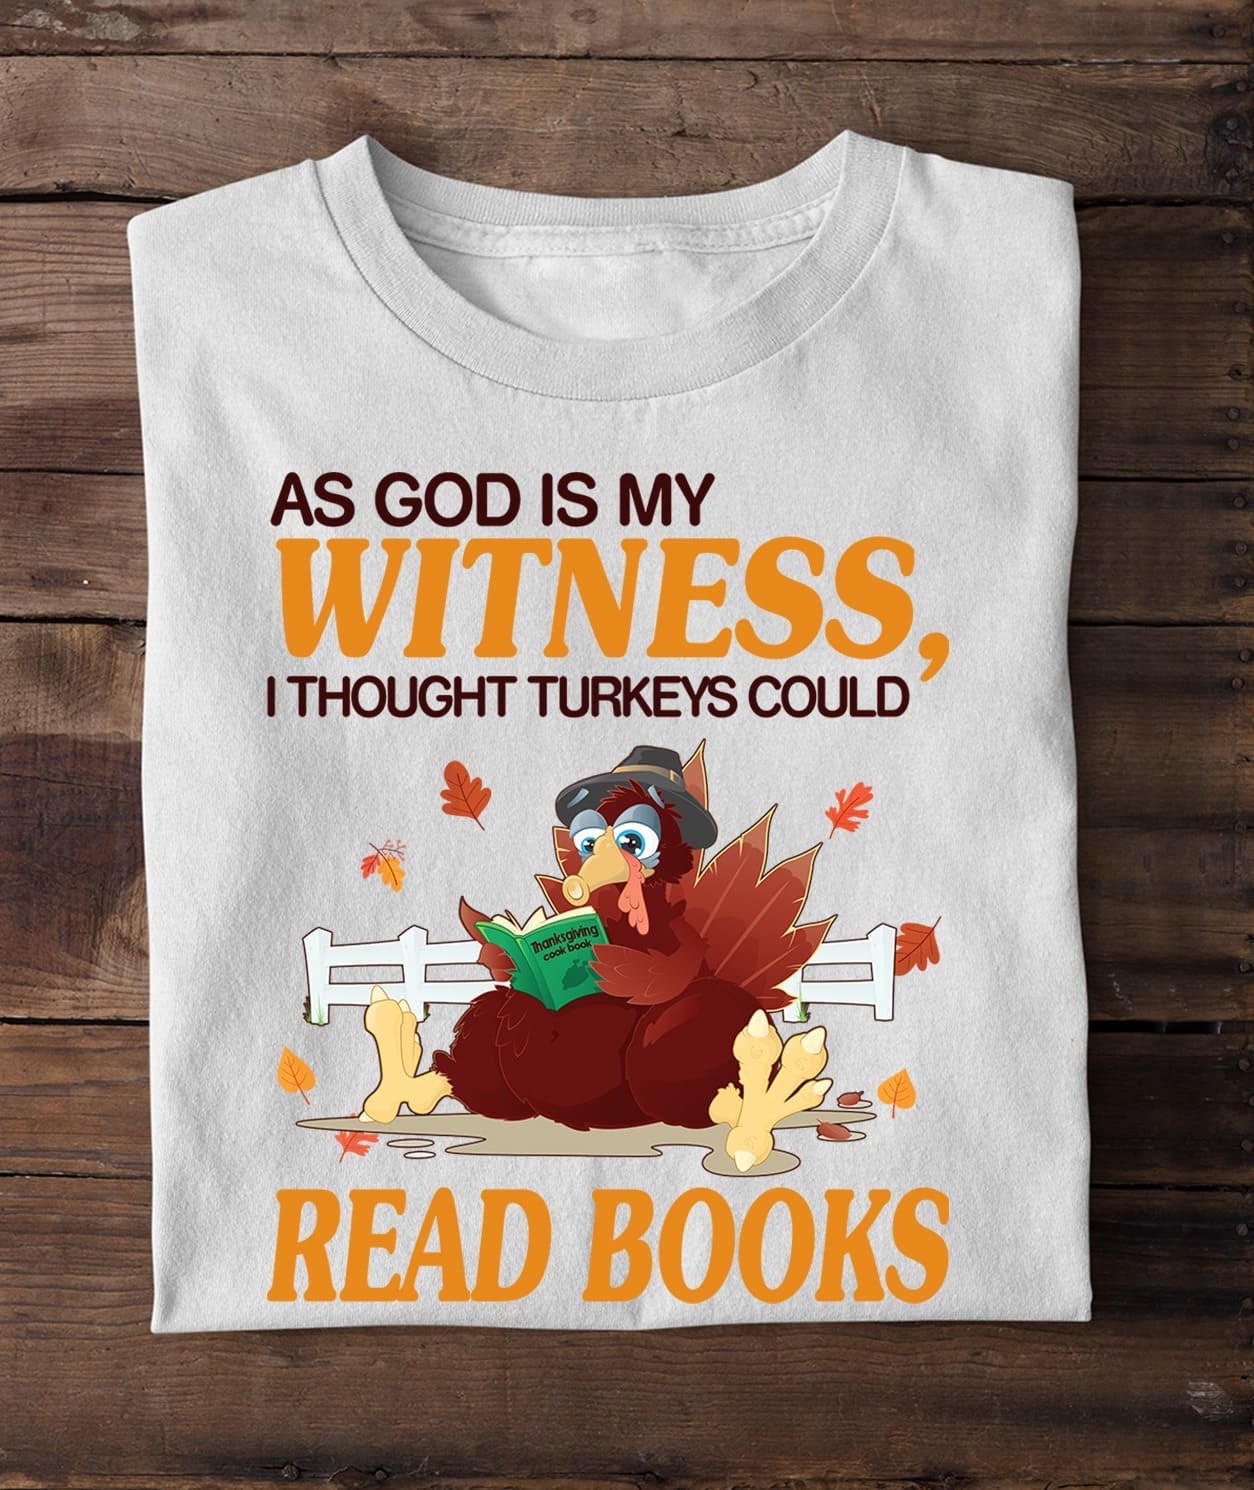 As God is my witness I thought turkeys could read books - Turkey reading books, Thanksgiving gift for bookaholic